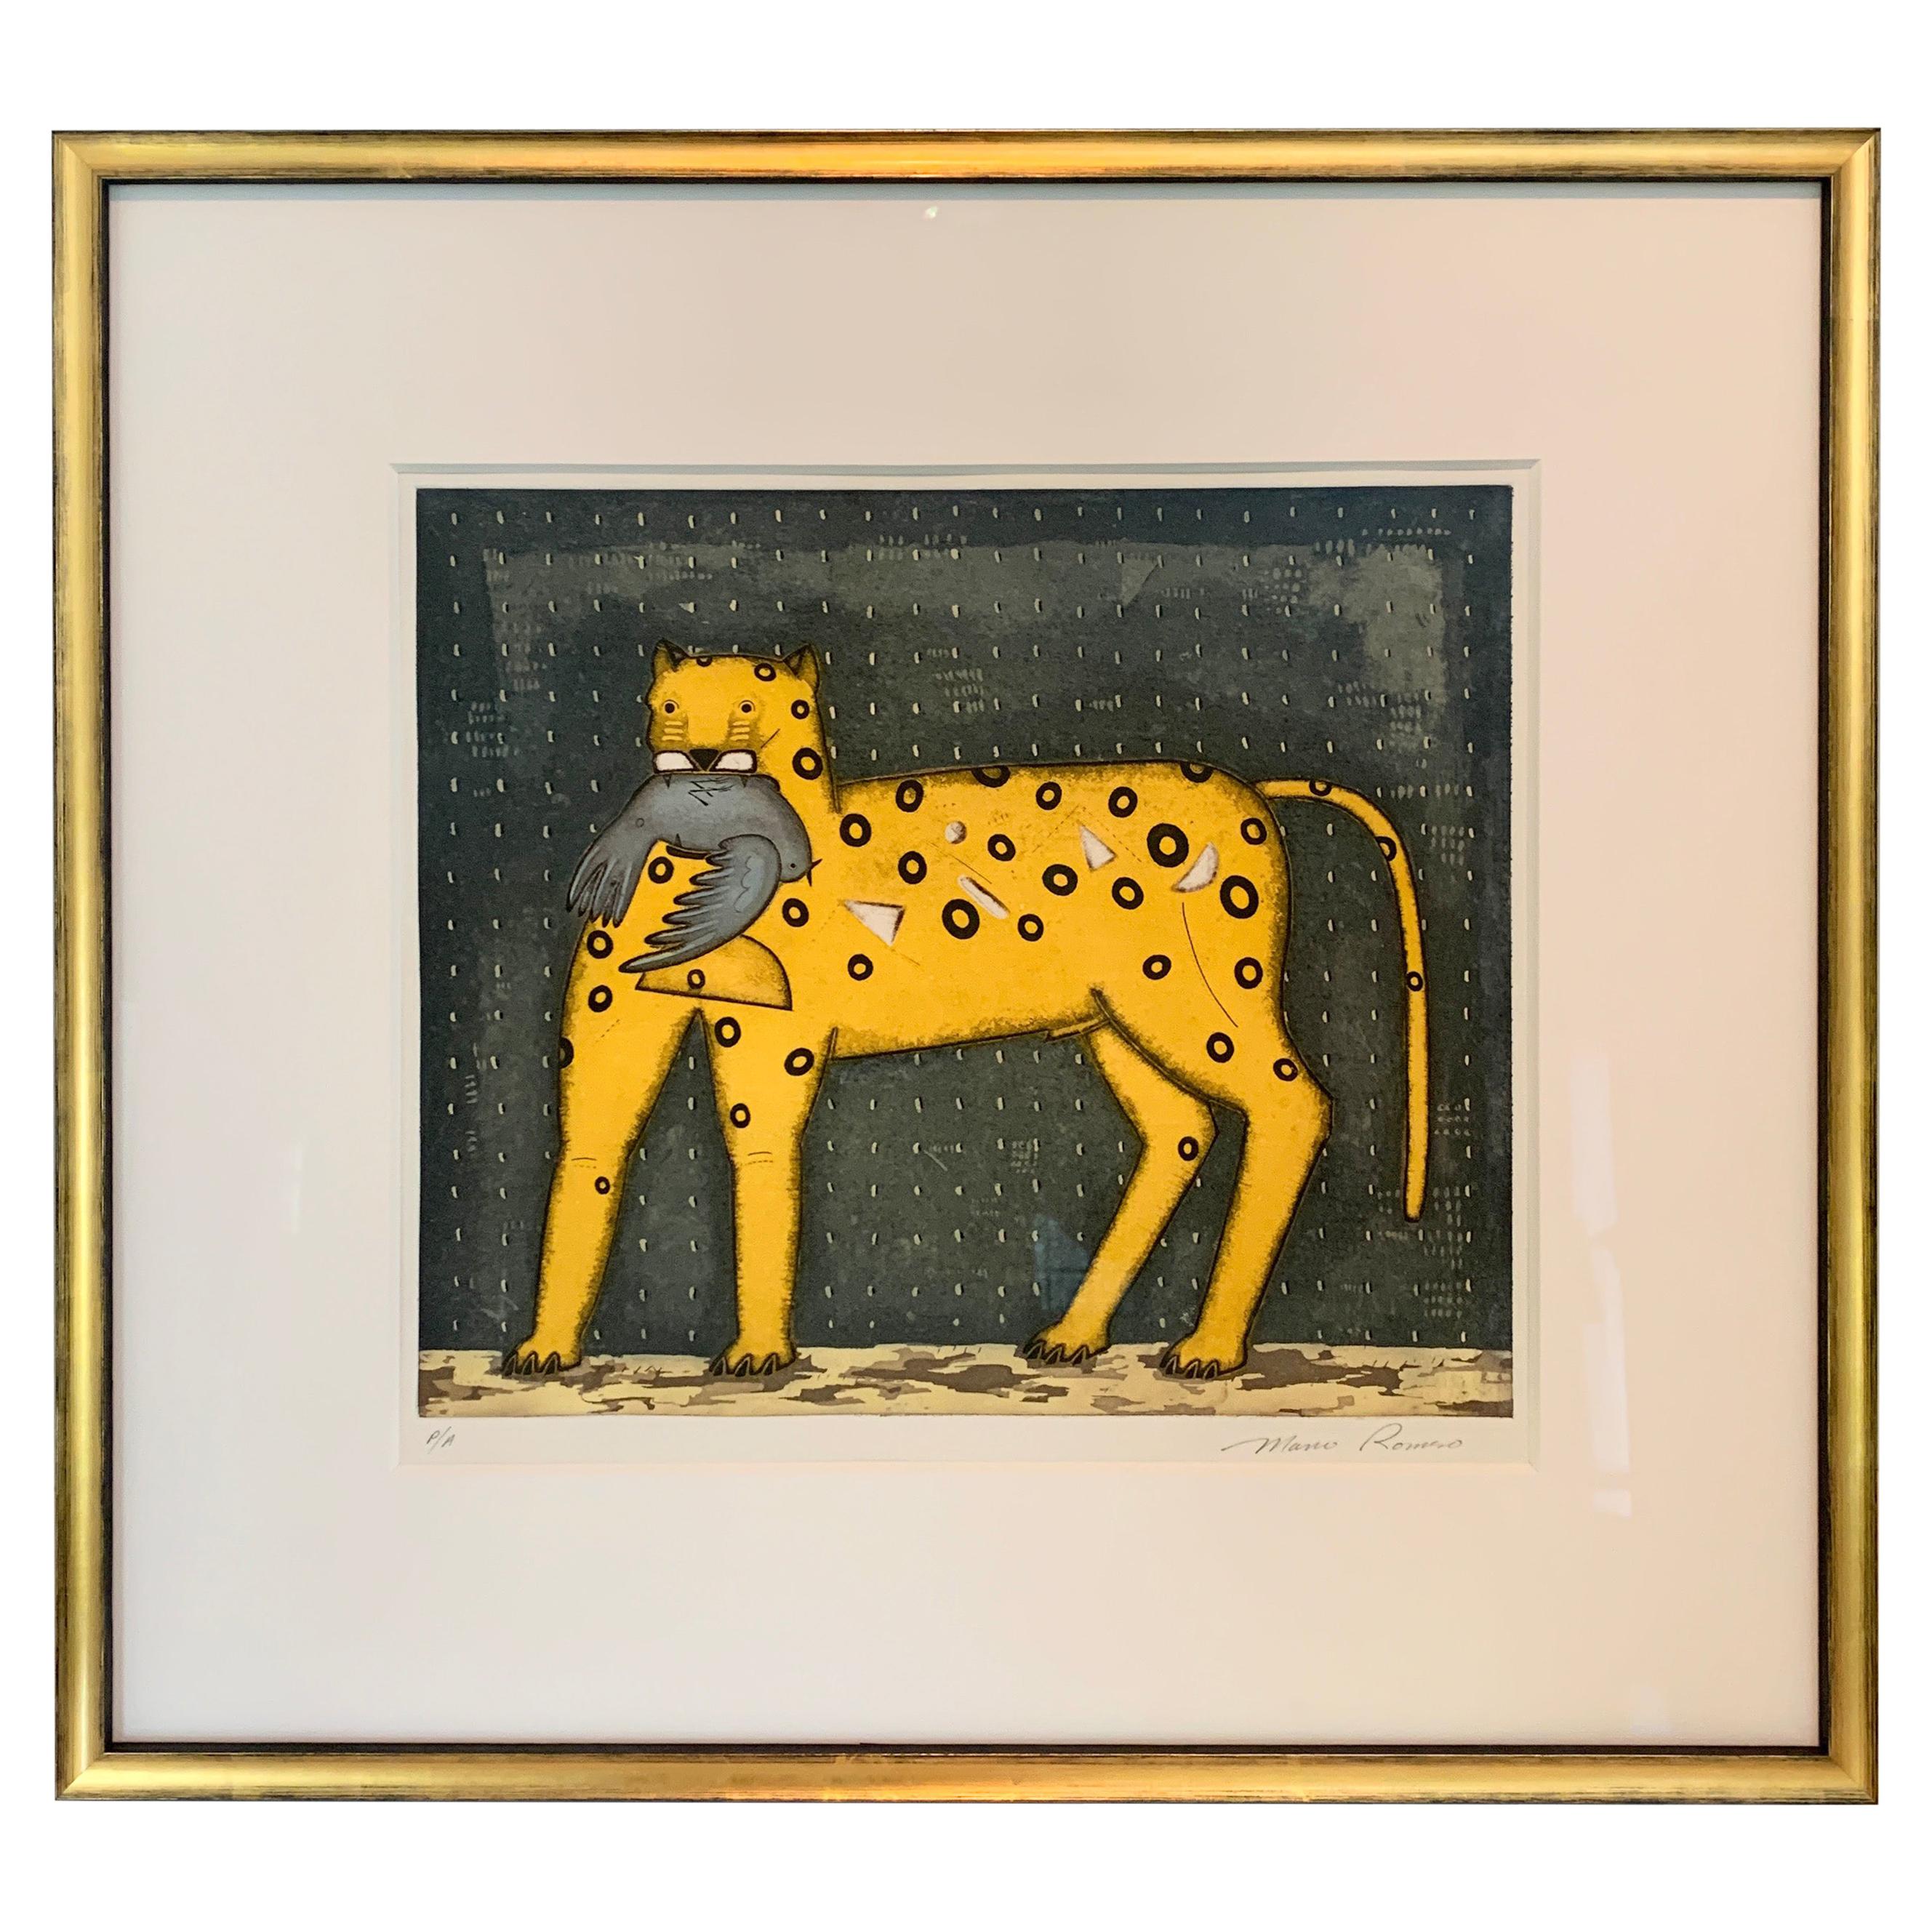 Framed Mexican Lithograph of Yellow Cat and Bird by Mario Romero